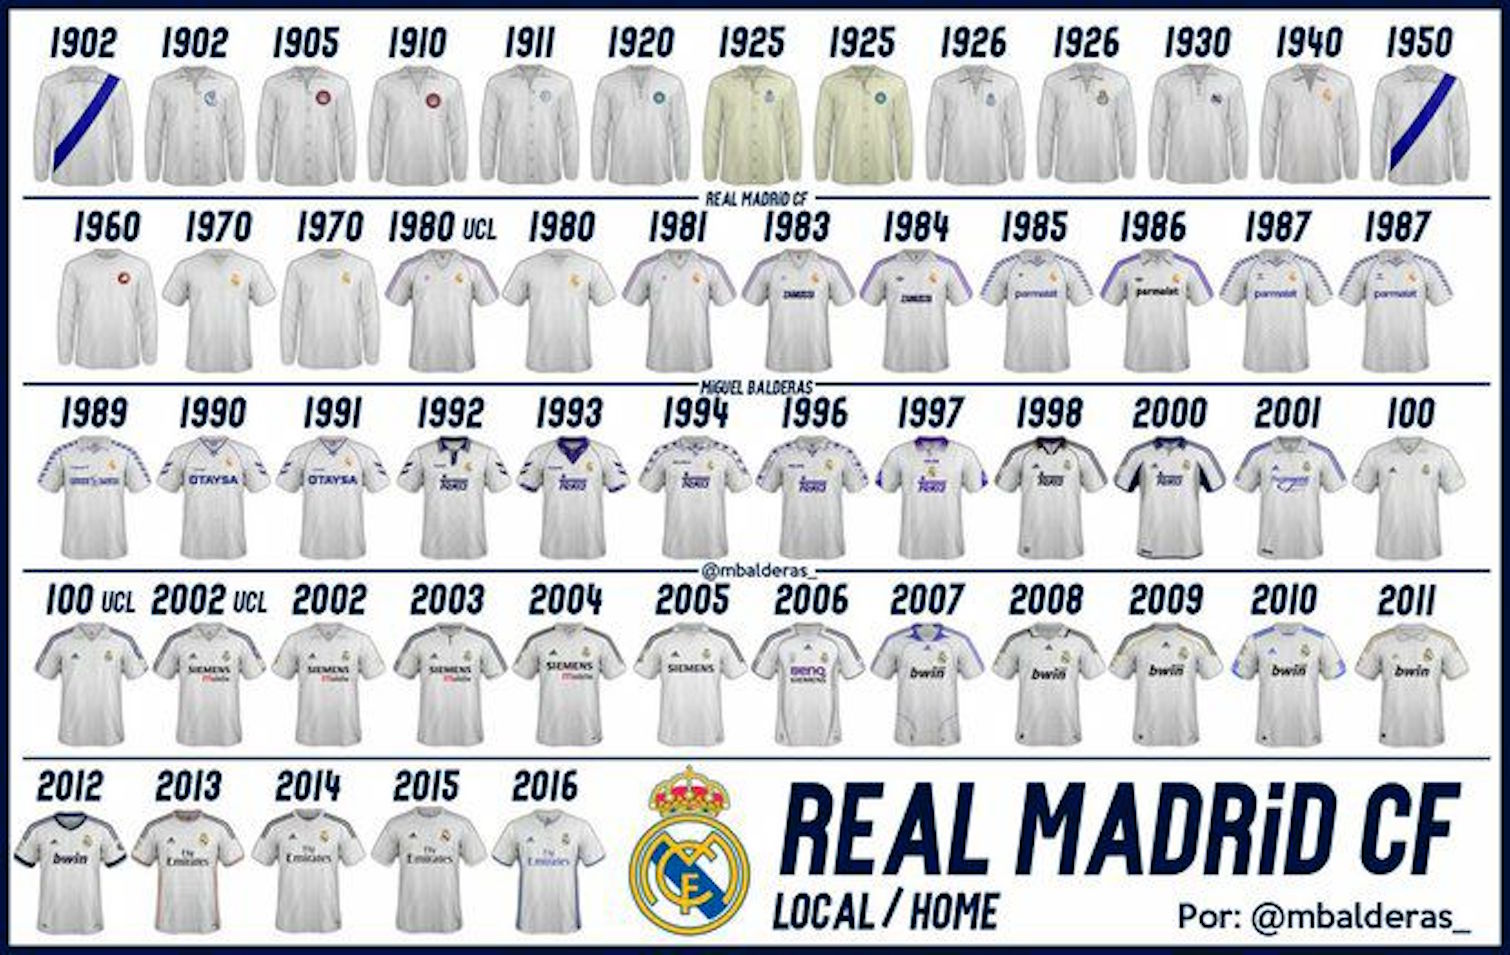 real madrid jerseys by year